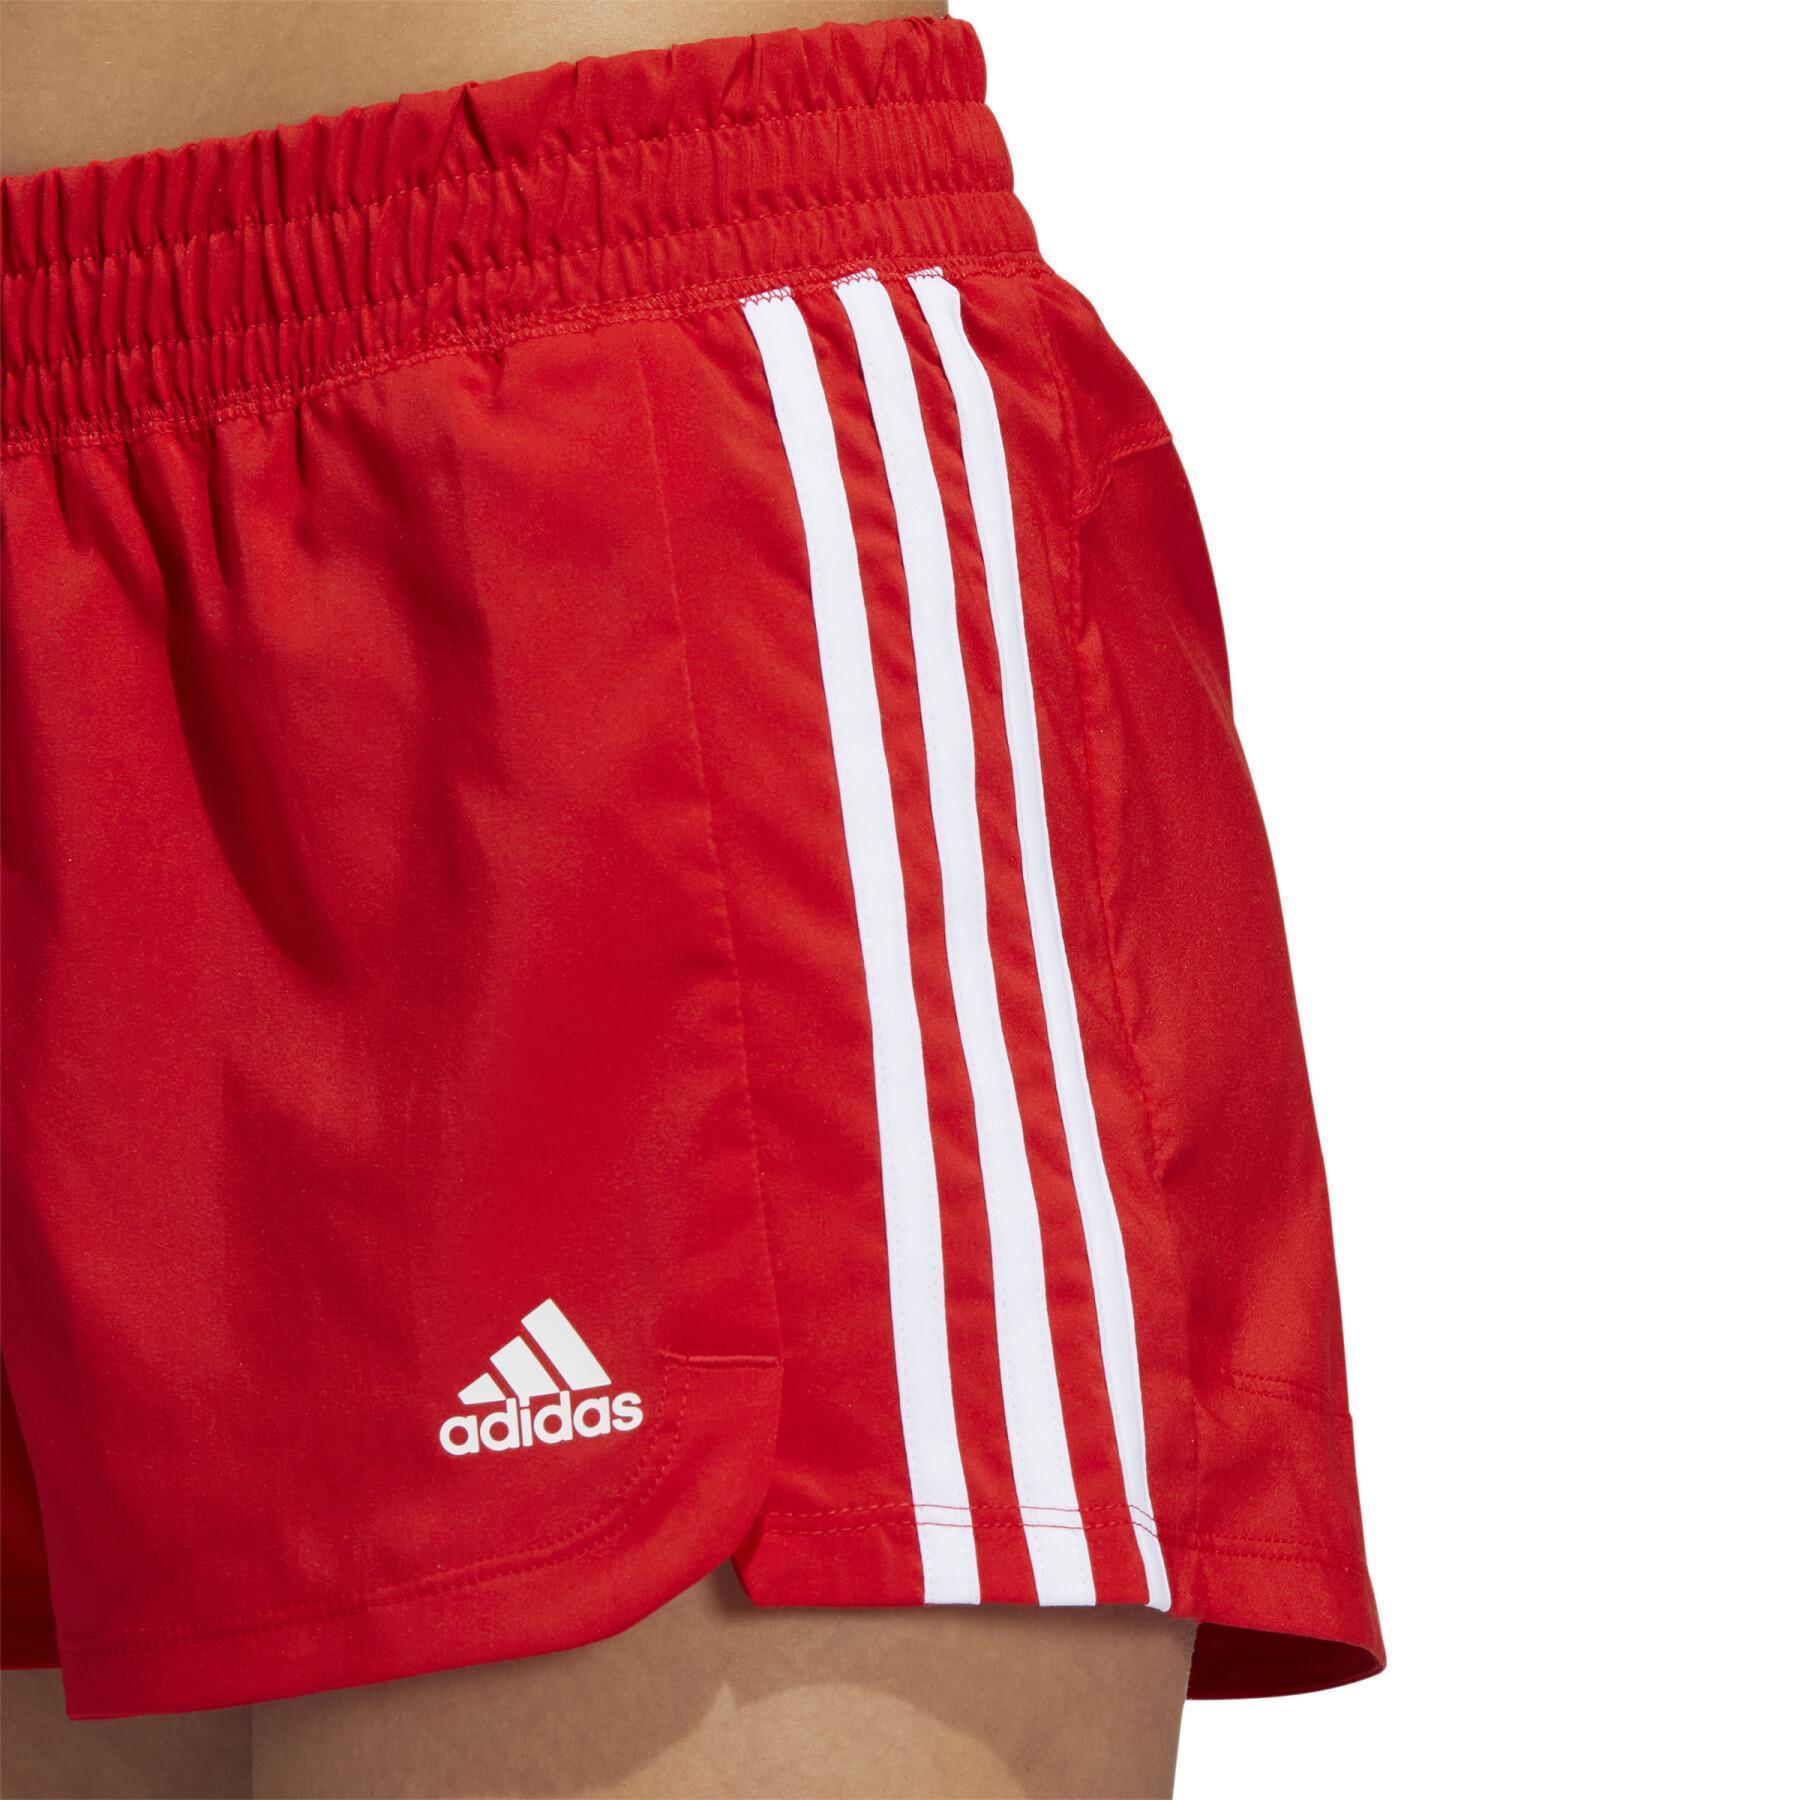 Women's shorts adidas Pacer 3-Stripes Woven